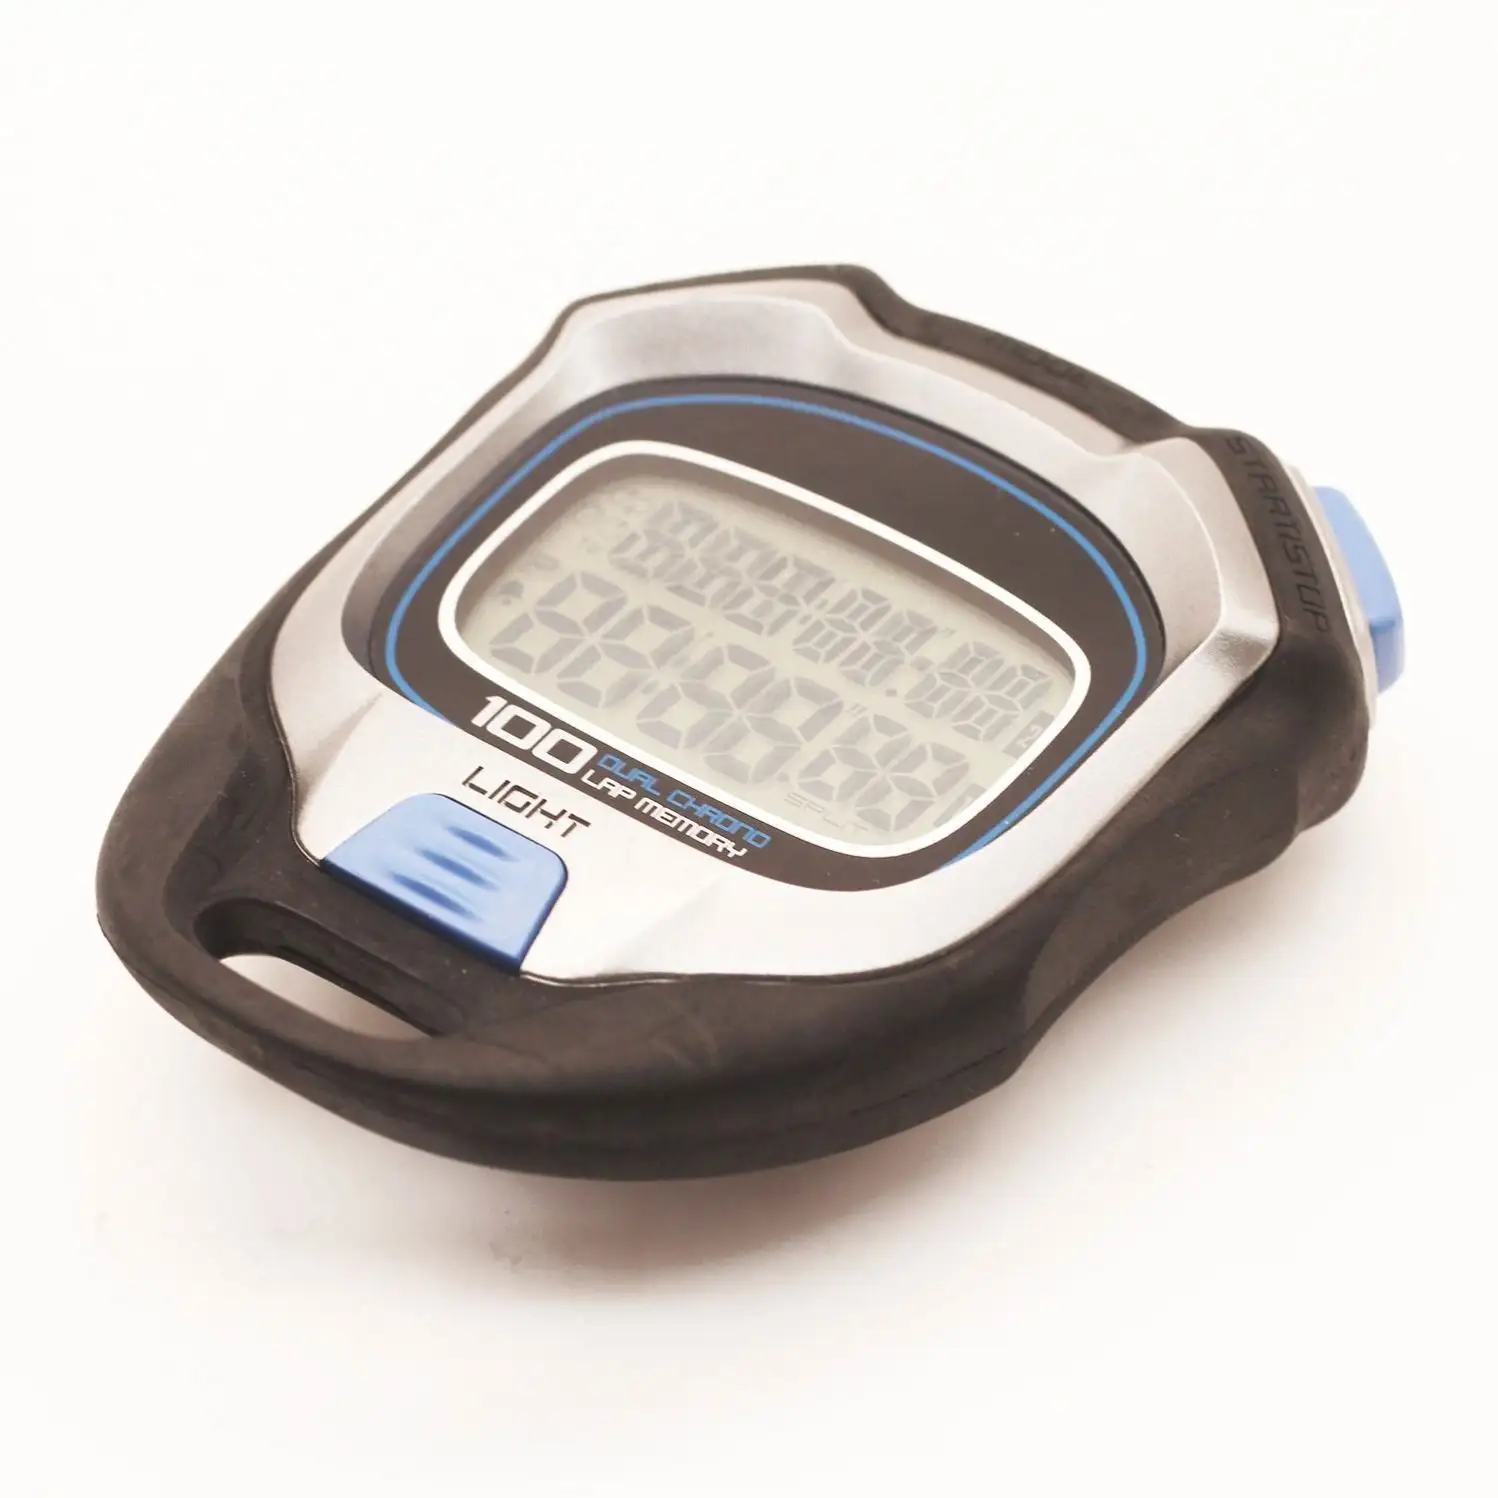 Bicycle Mechanical Digital Timer Waterproof Running Coaches Hand Sport Profesional Clock And Pedometer Stopwatch